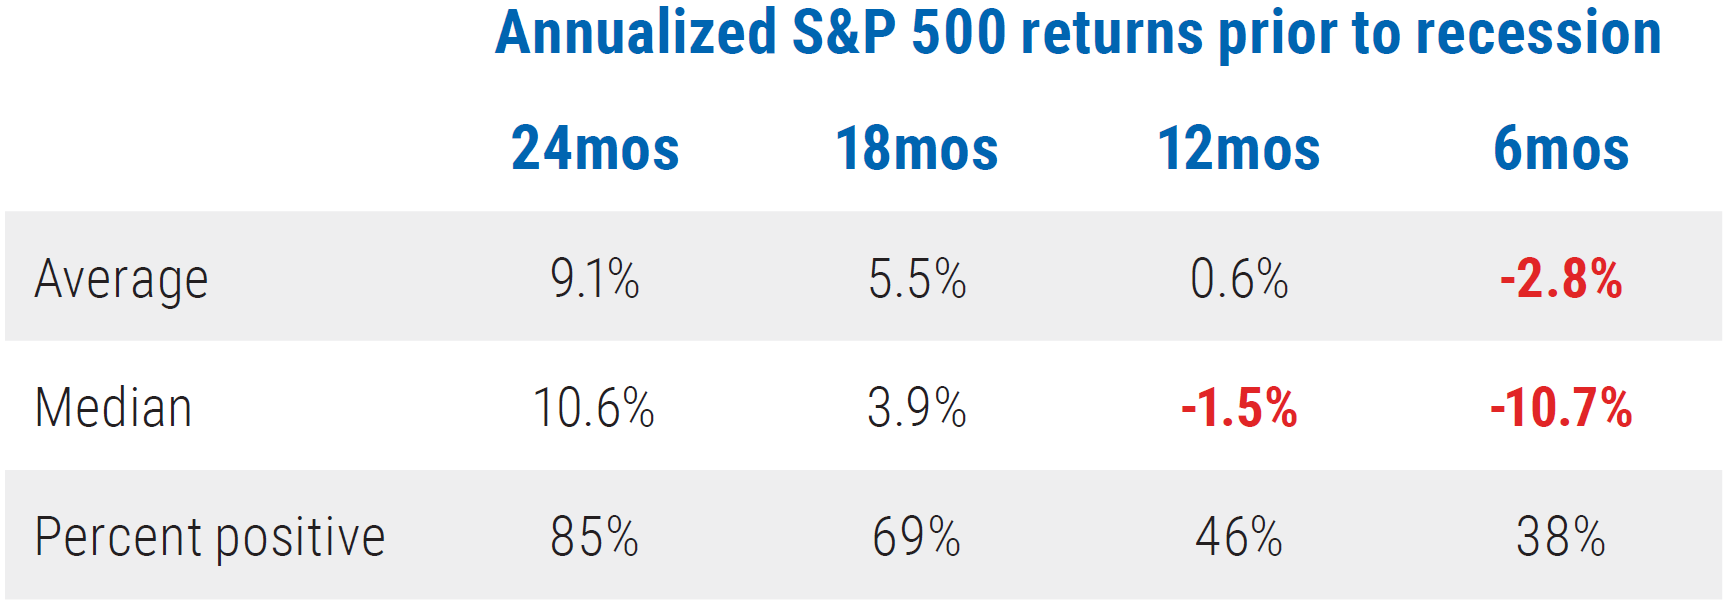 Figure 3 is a table that shows how equities tend to perform poorly closer to a recession. Data within the table shows total return data from the period November 1936 to December 2018